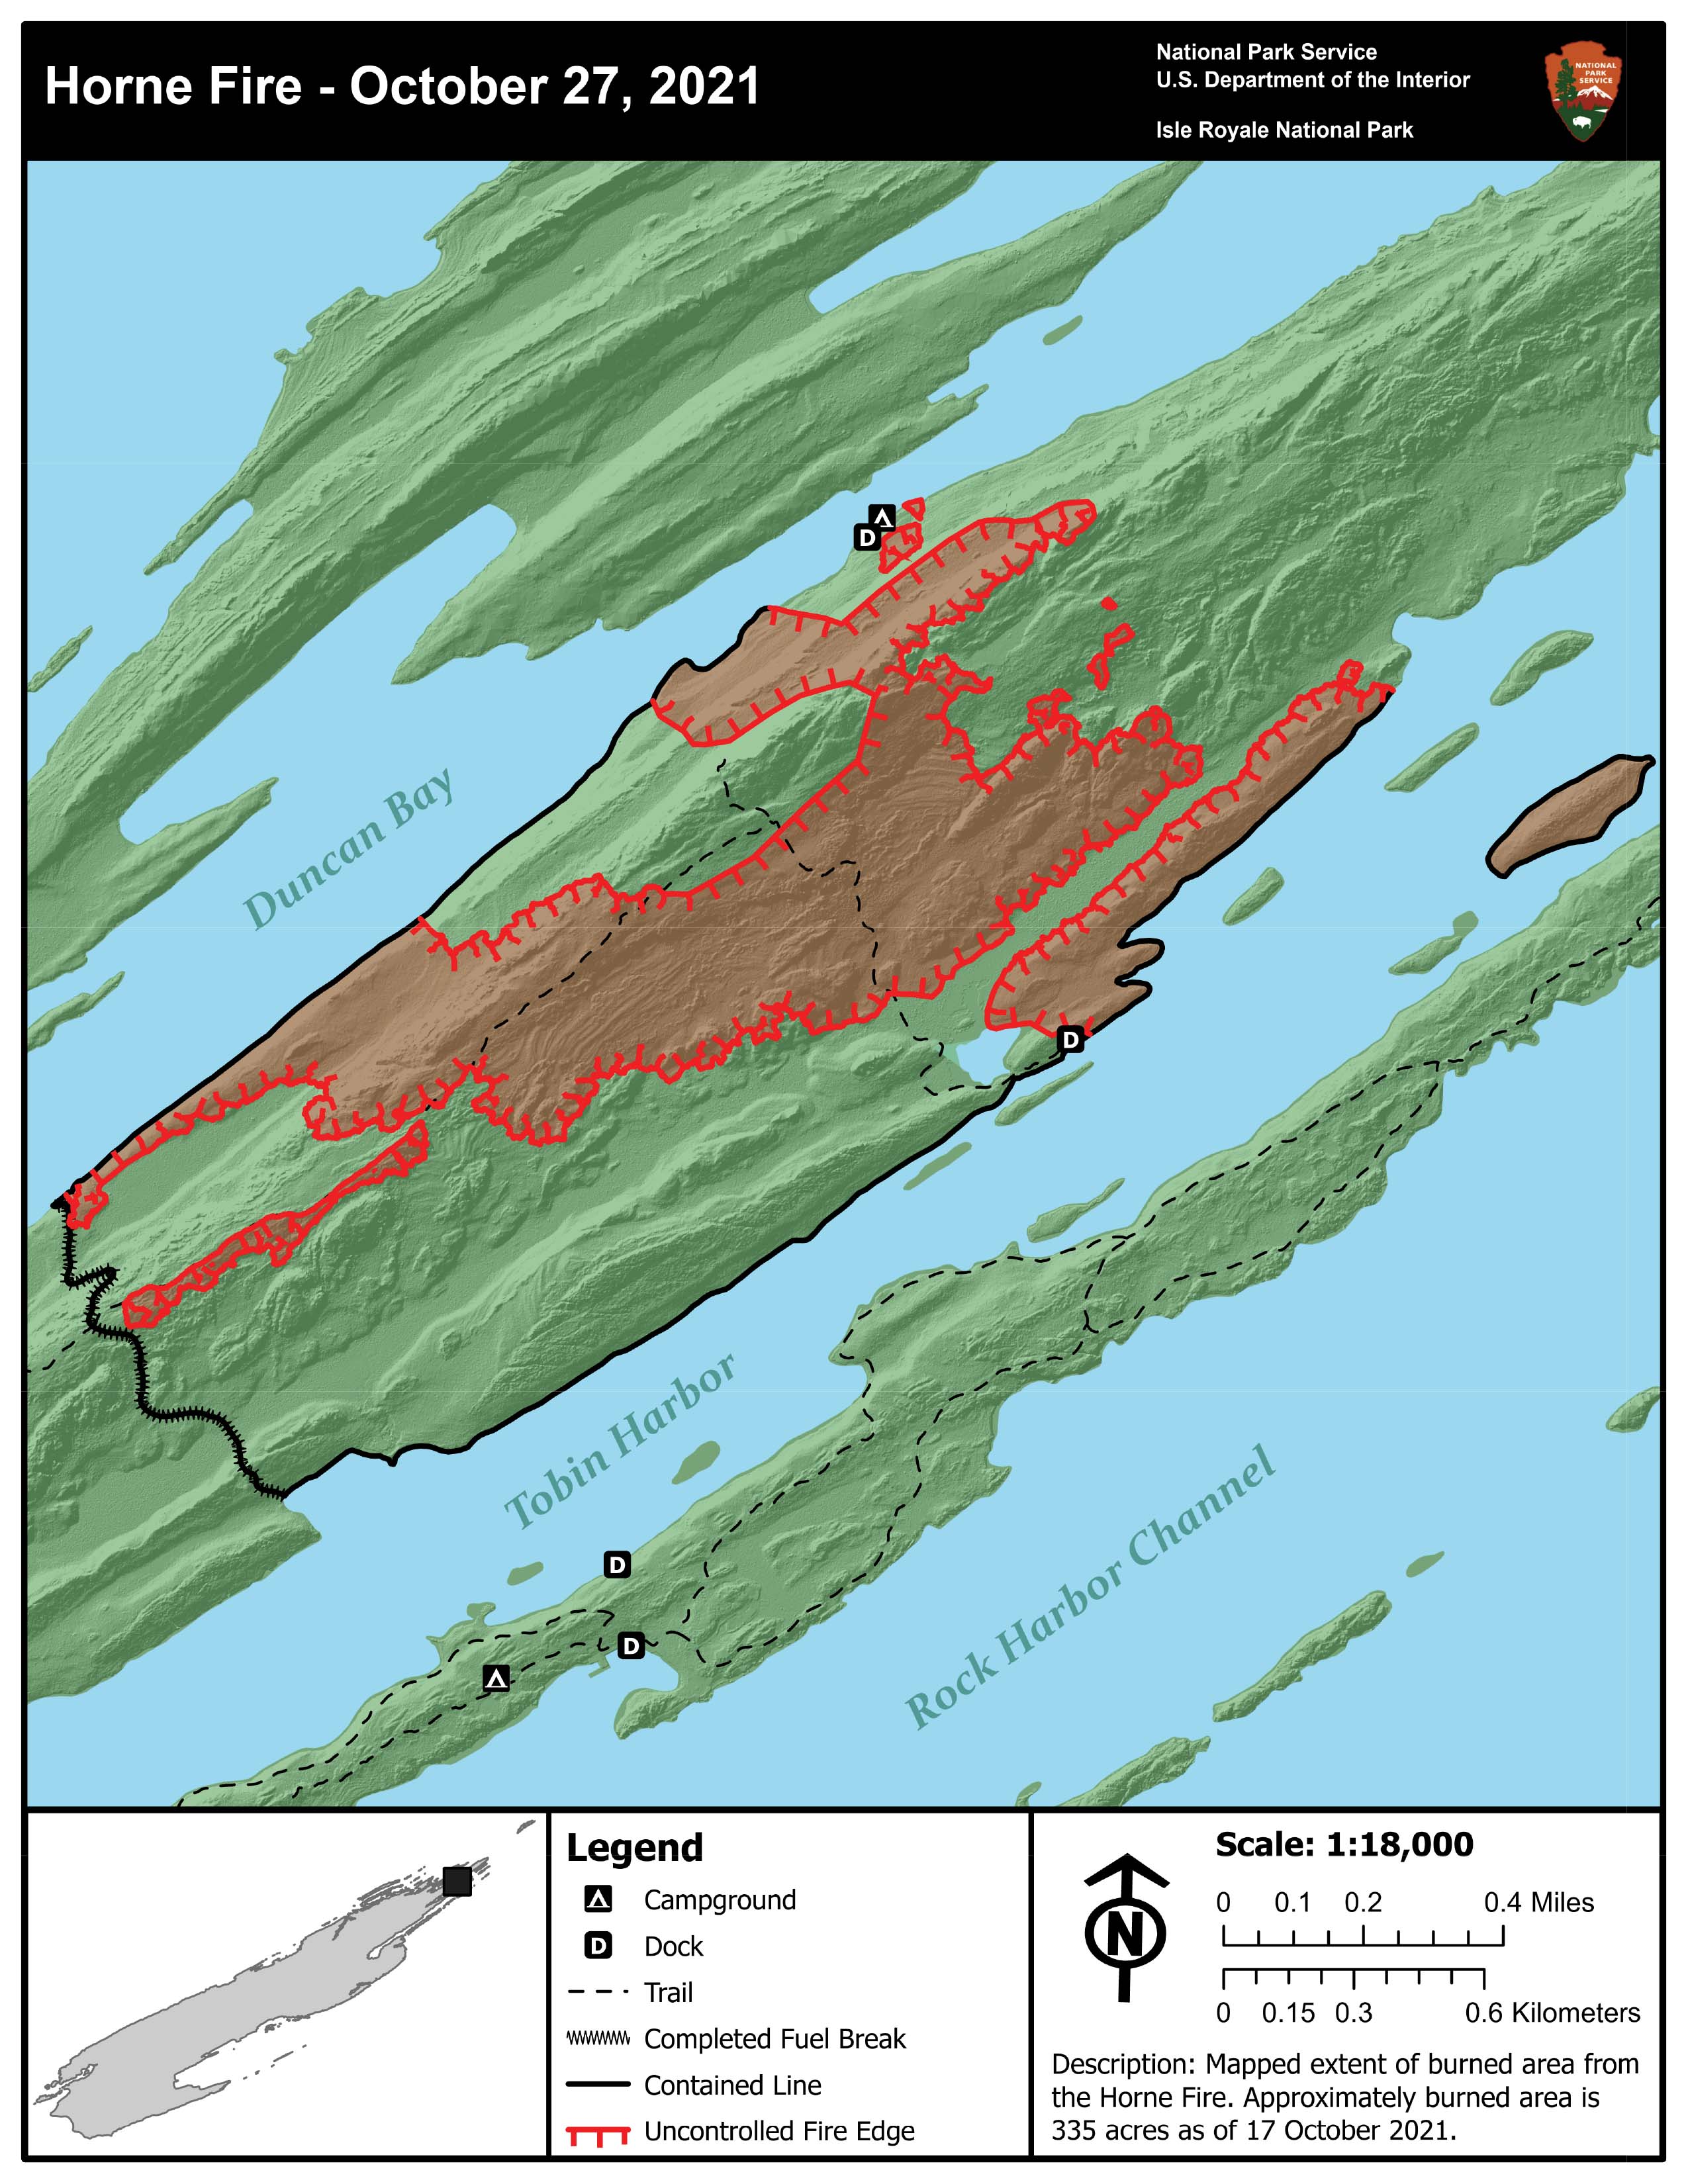 Map of northeastern Isle Royale showing the extent of the Horne Fire. The Fire boundary is marked in red. The fire is mainly bounded by Tobin Harbor on the southeast and Duncan Bay on the northwest.